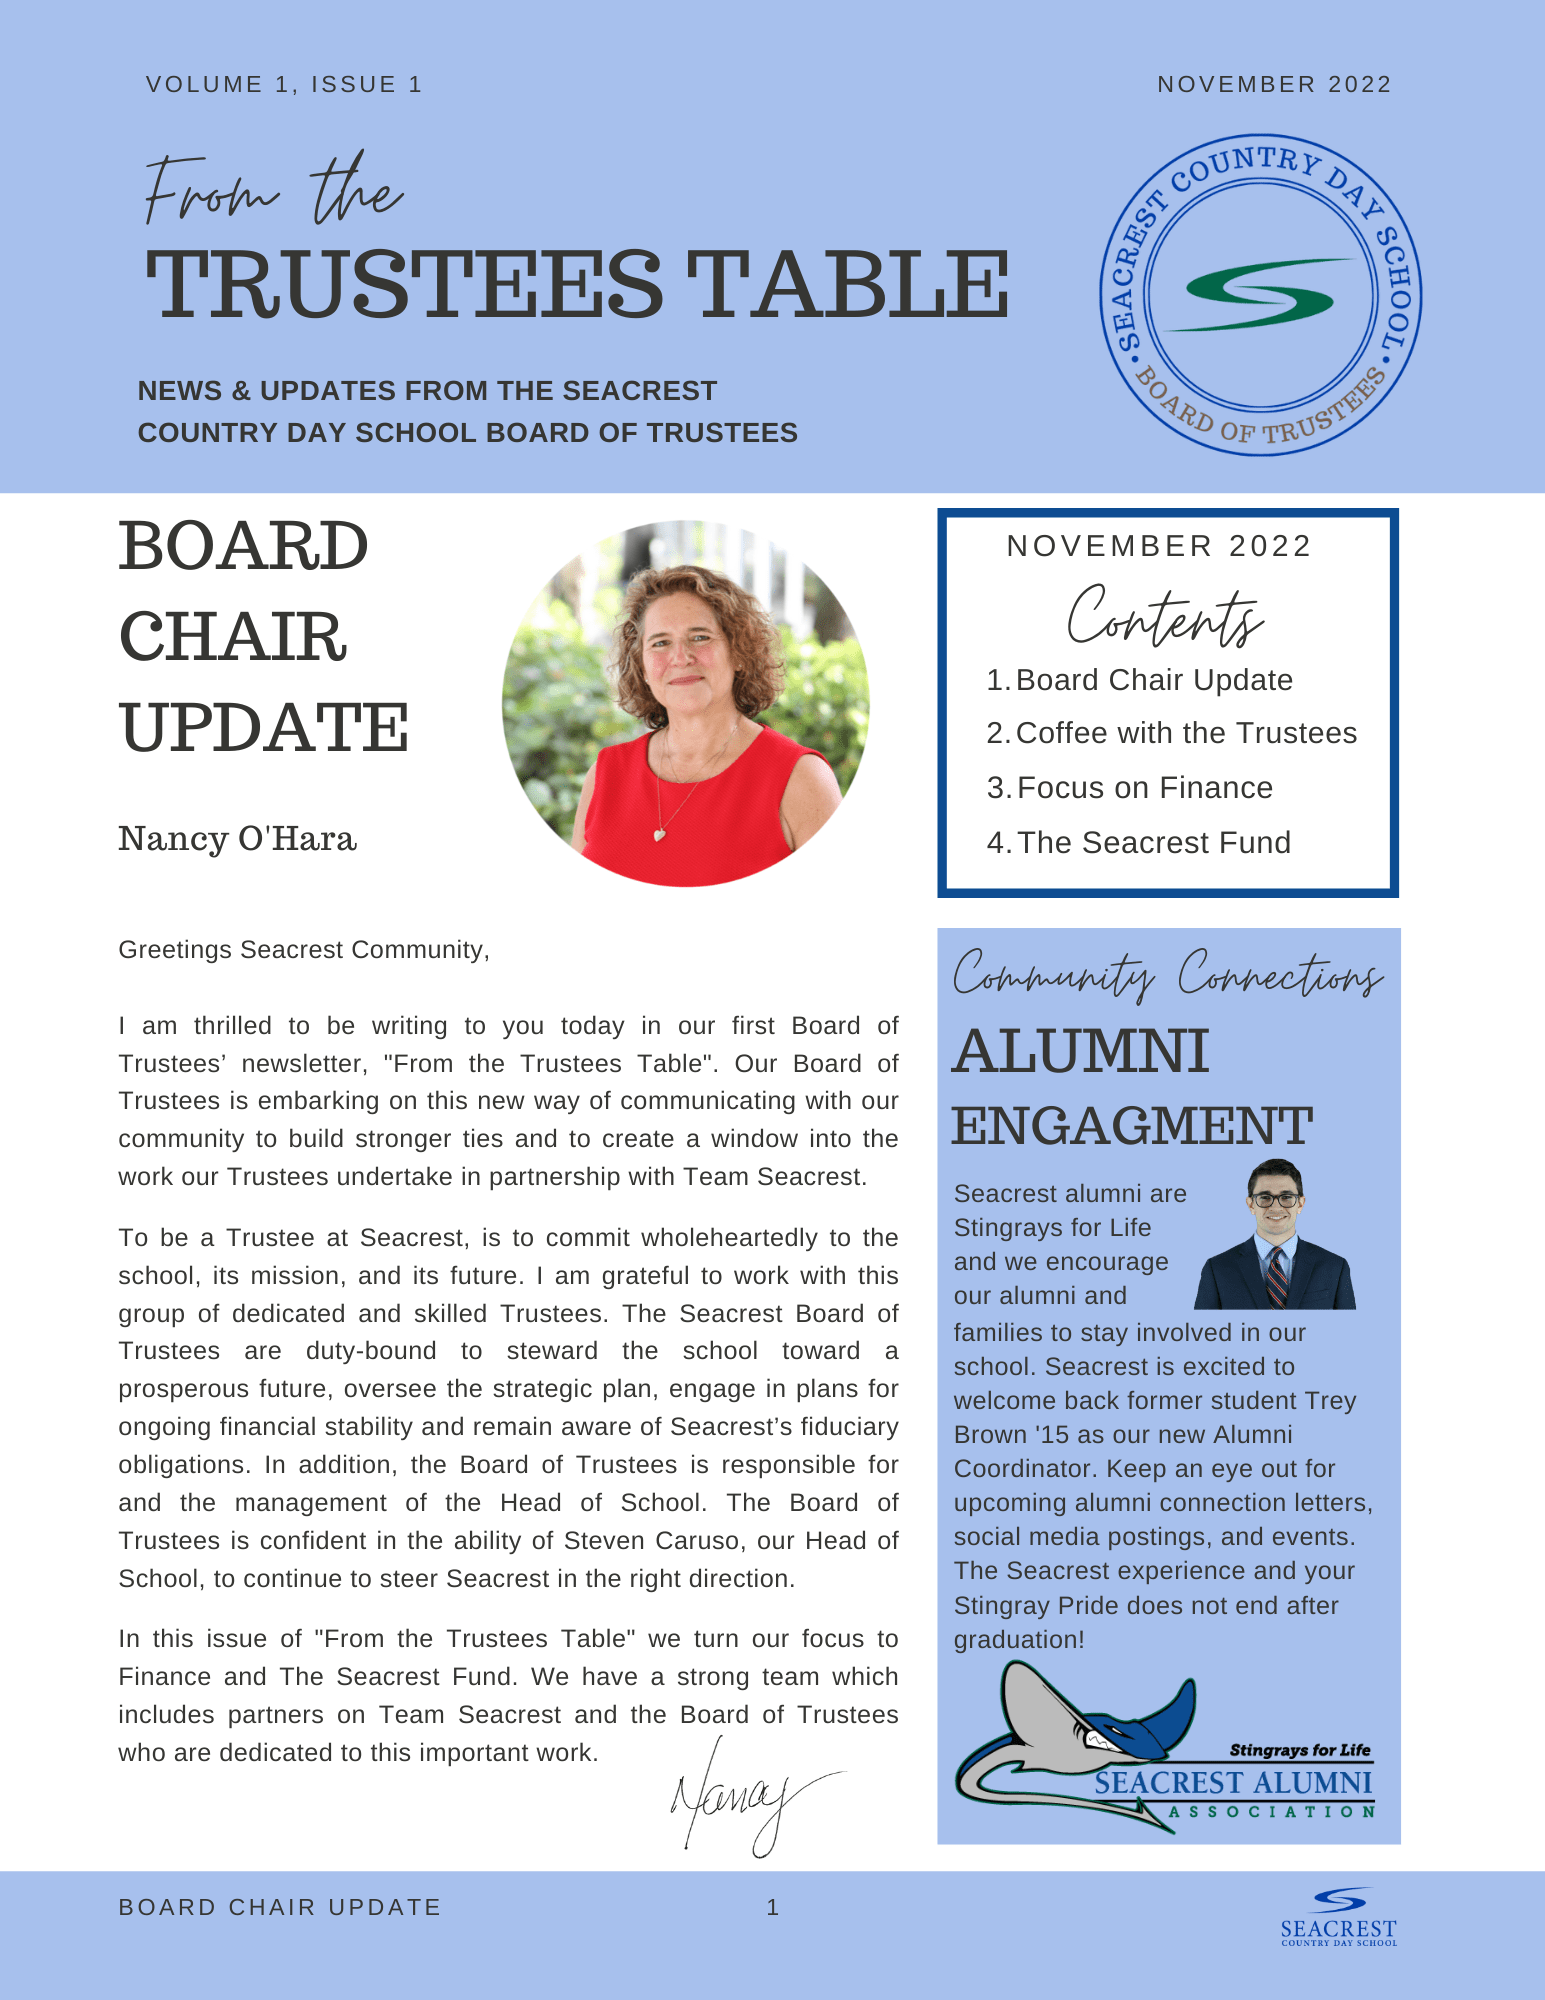 News and Updates from the SCDS Board of Trustees